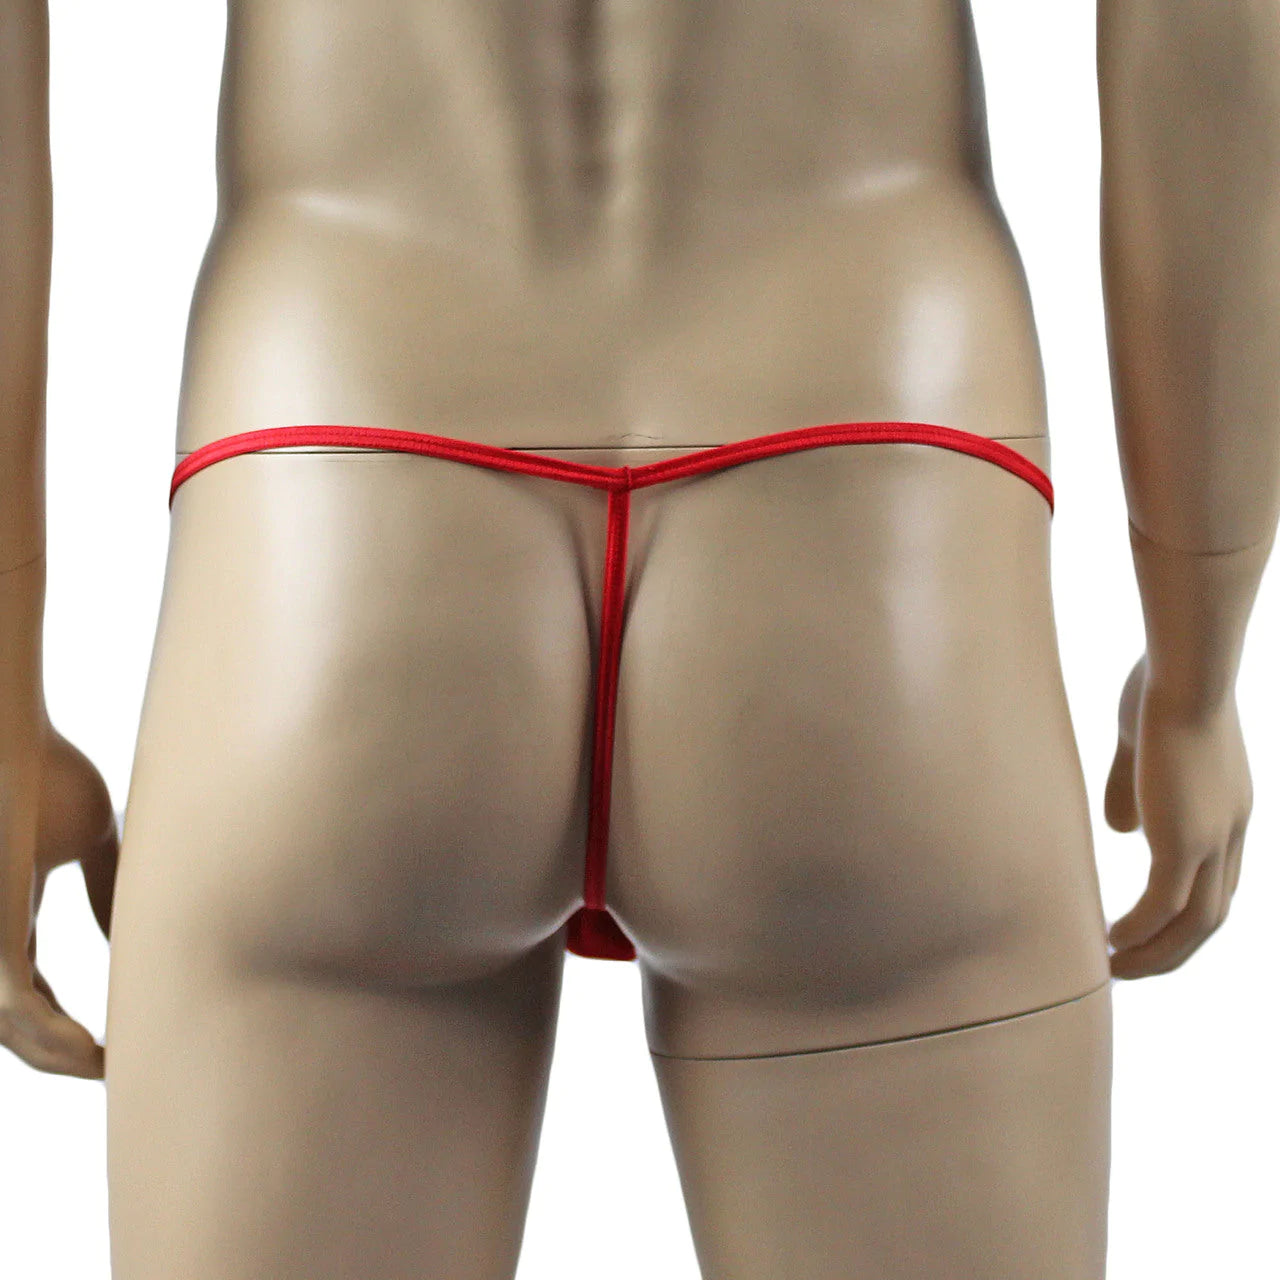 SALE - Mens Xmas Mesh Pouch G string with Sheer Christmas Decoration Bow Red